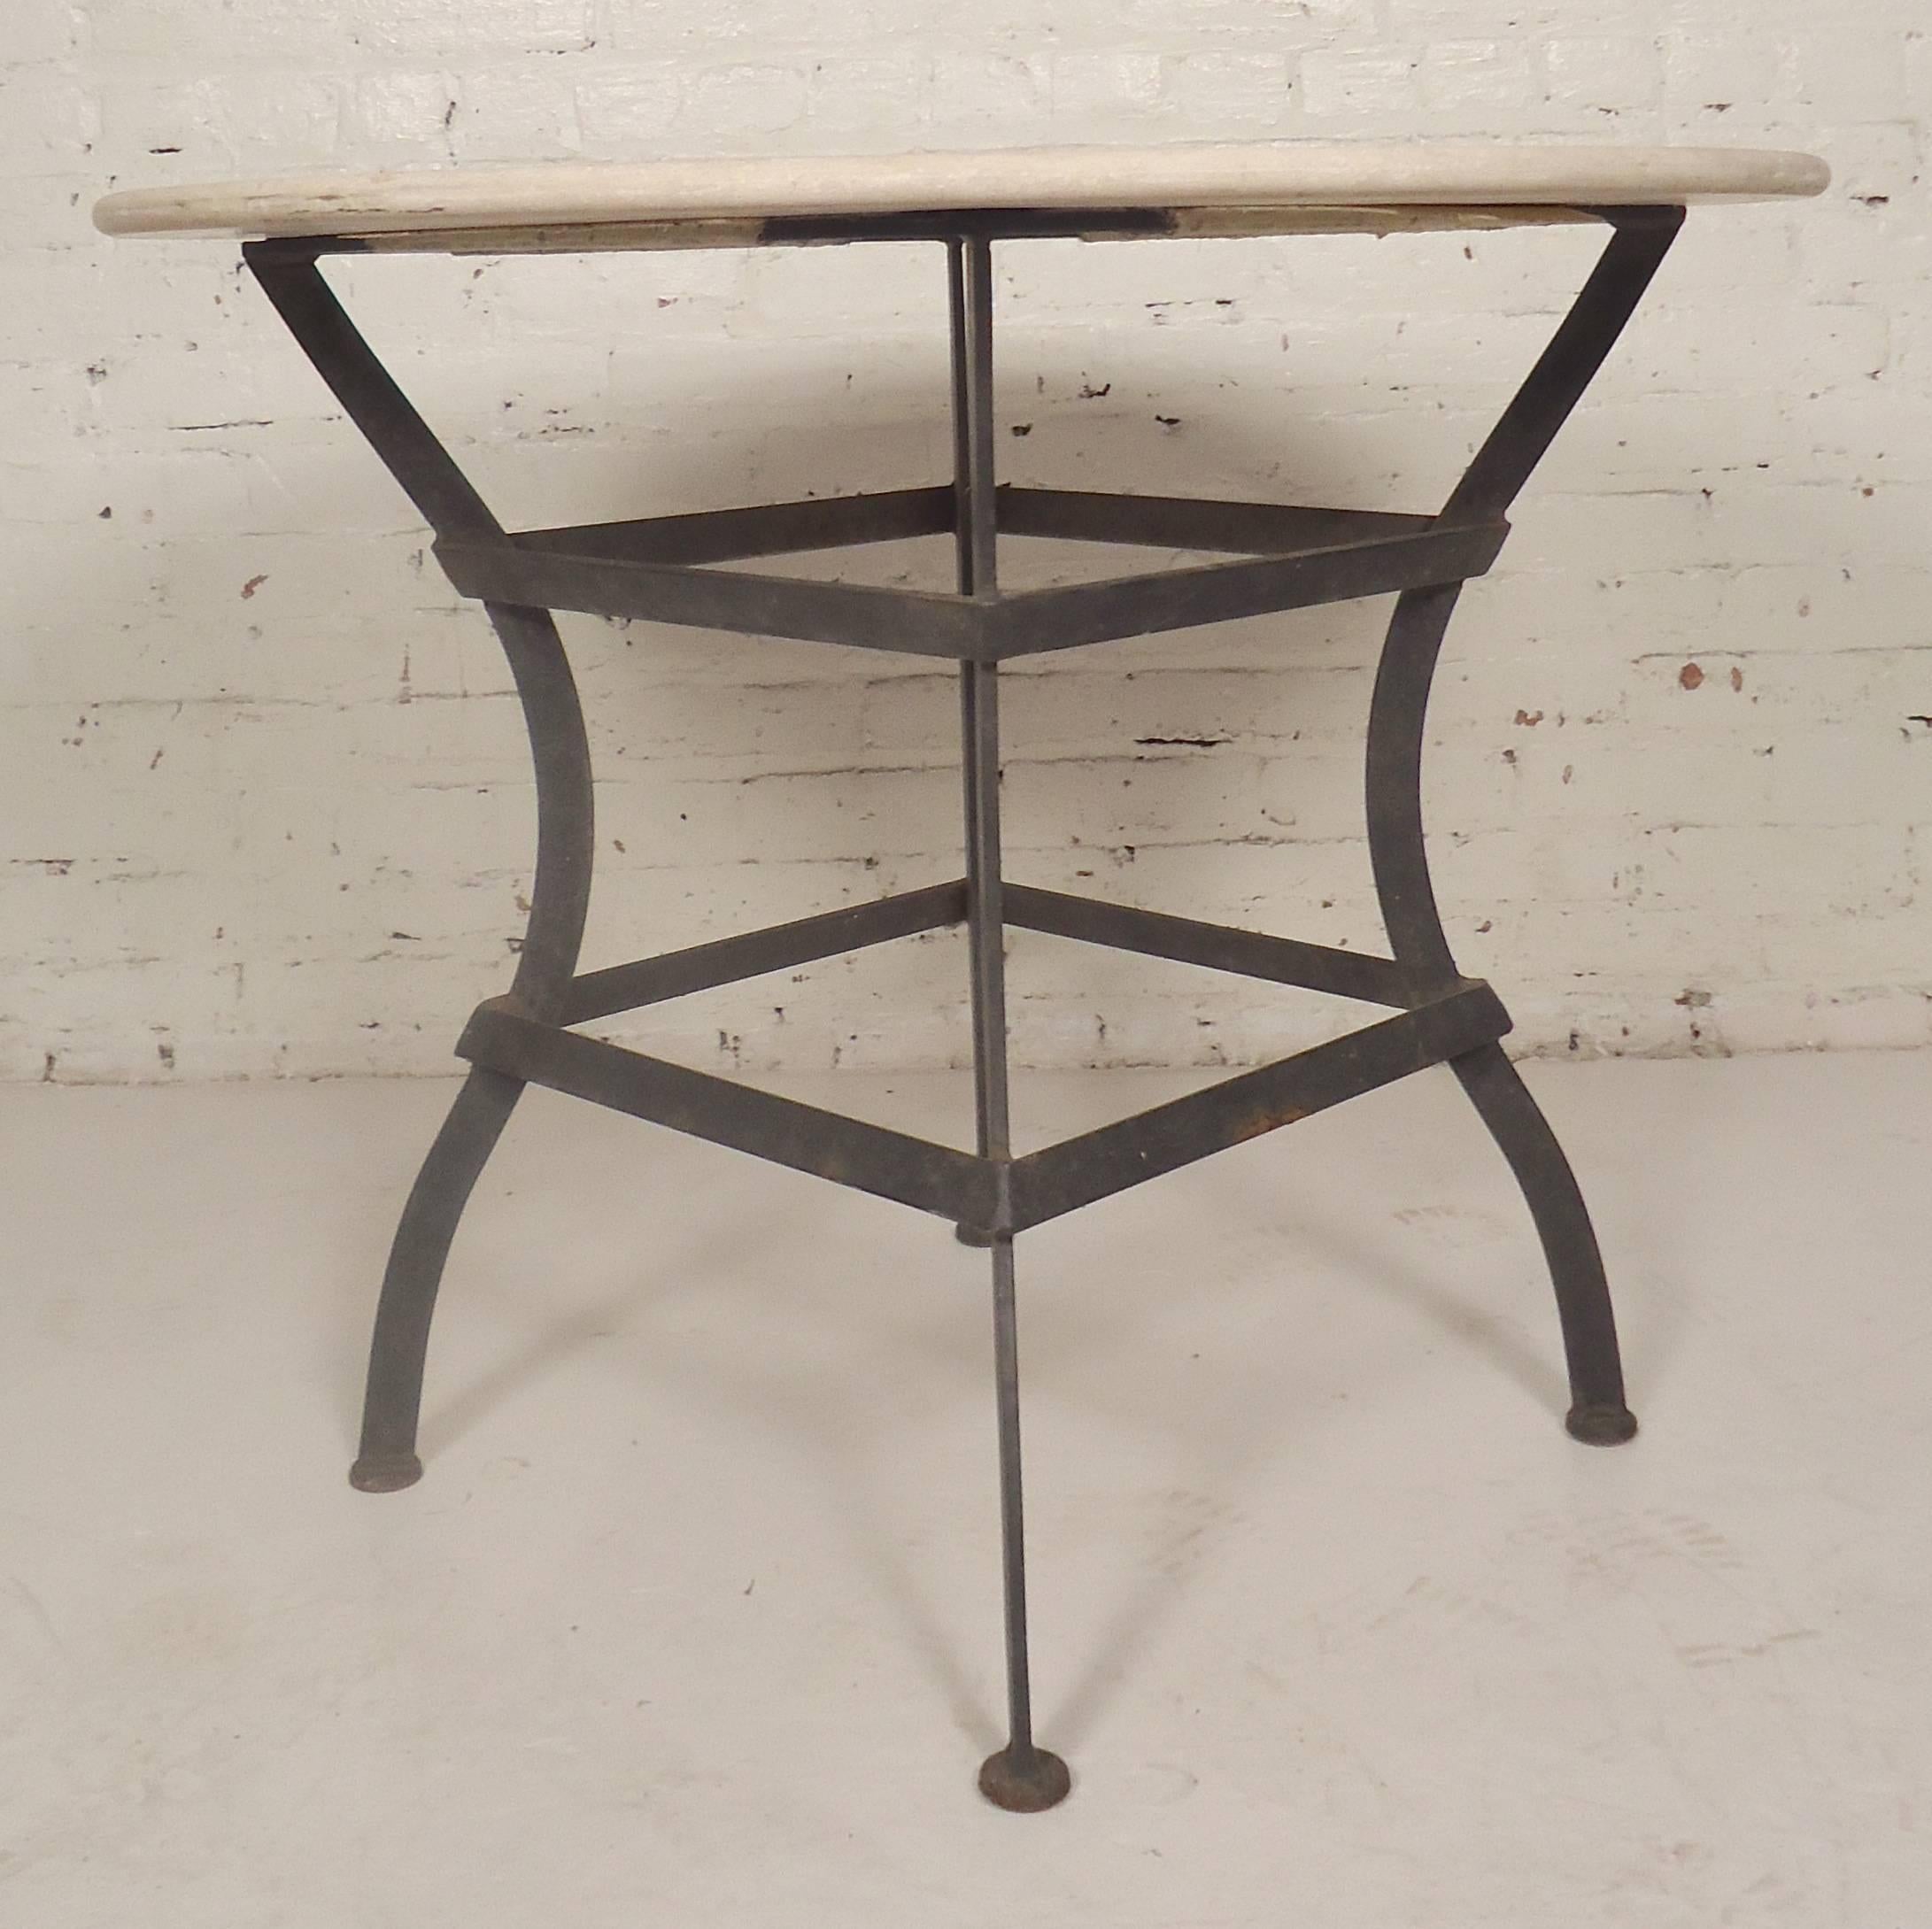 Vintage iron base table with thick stone top. Sturdy and strong with a clean look.

(Please confirm item location - NY or NJ - with dealer).
   